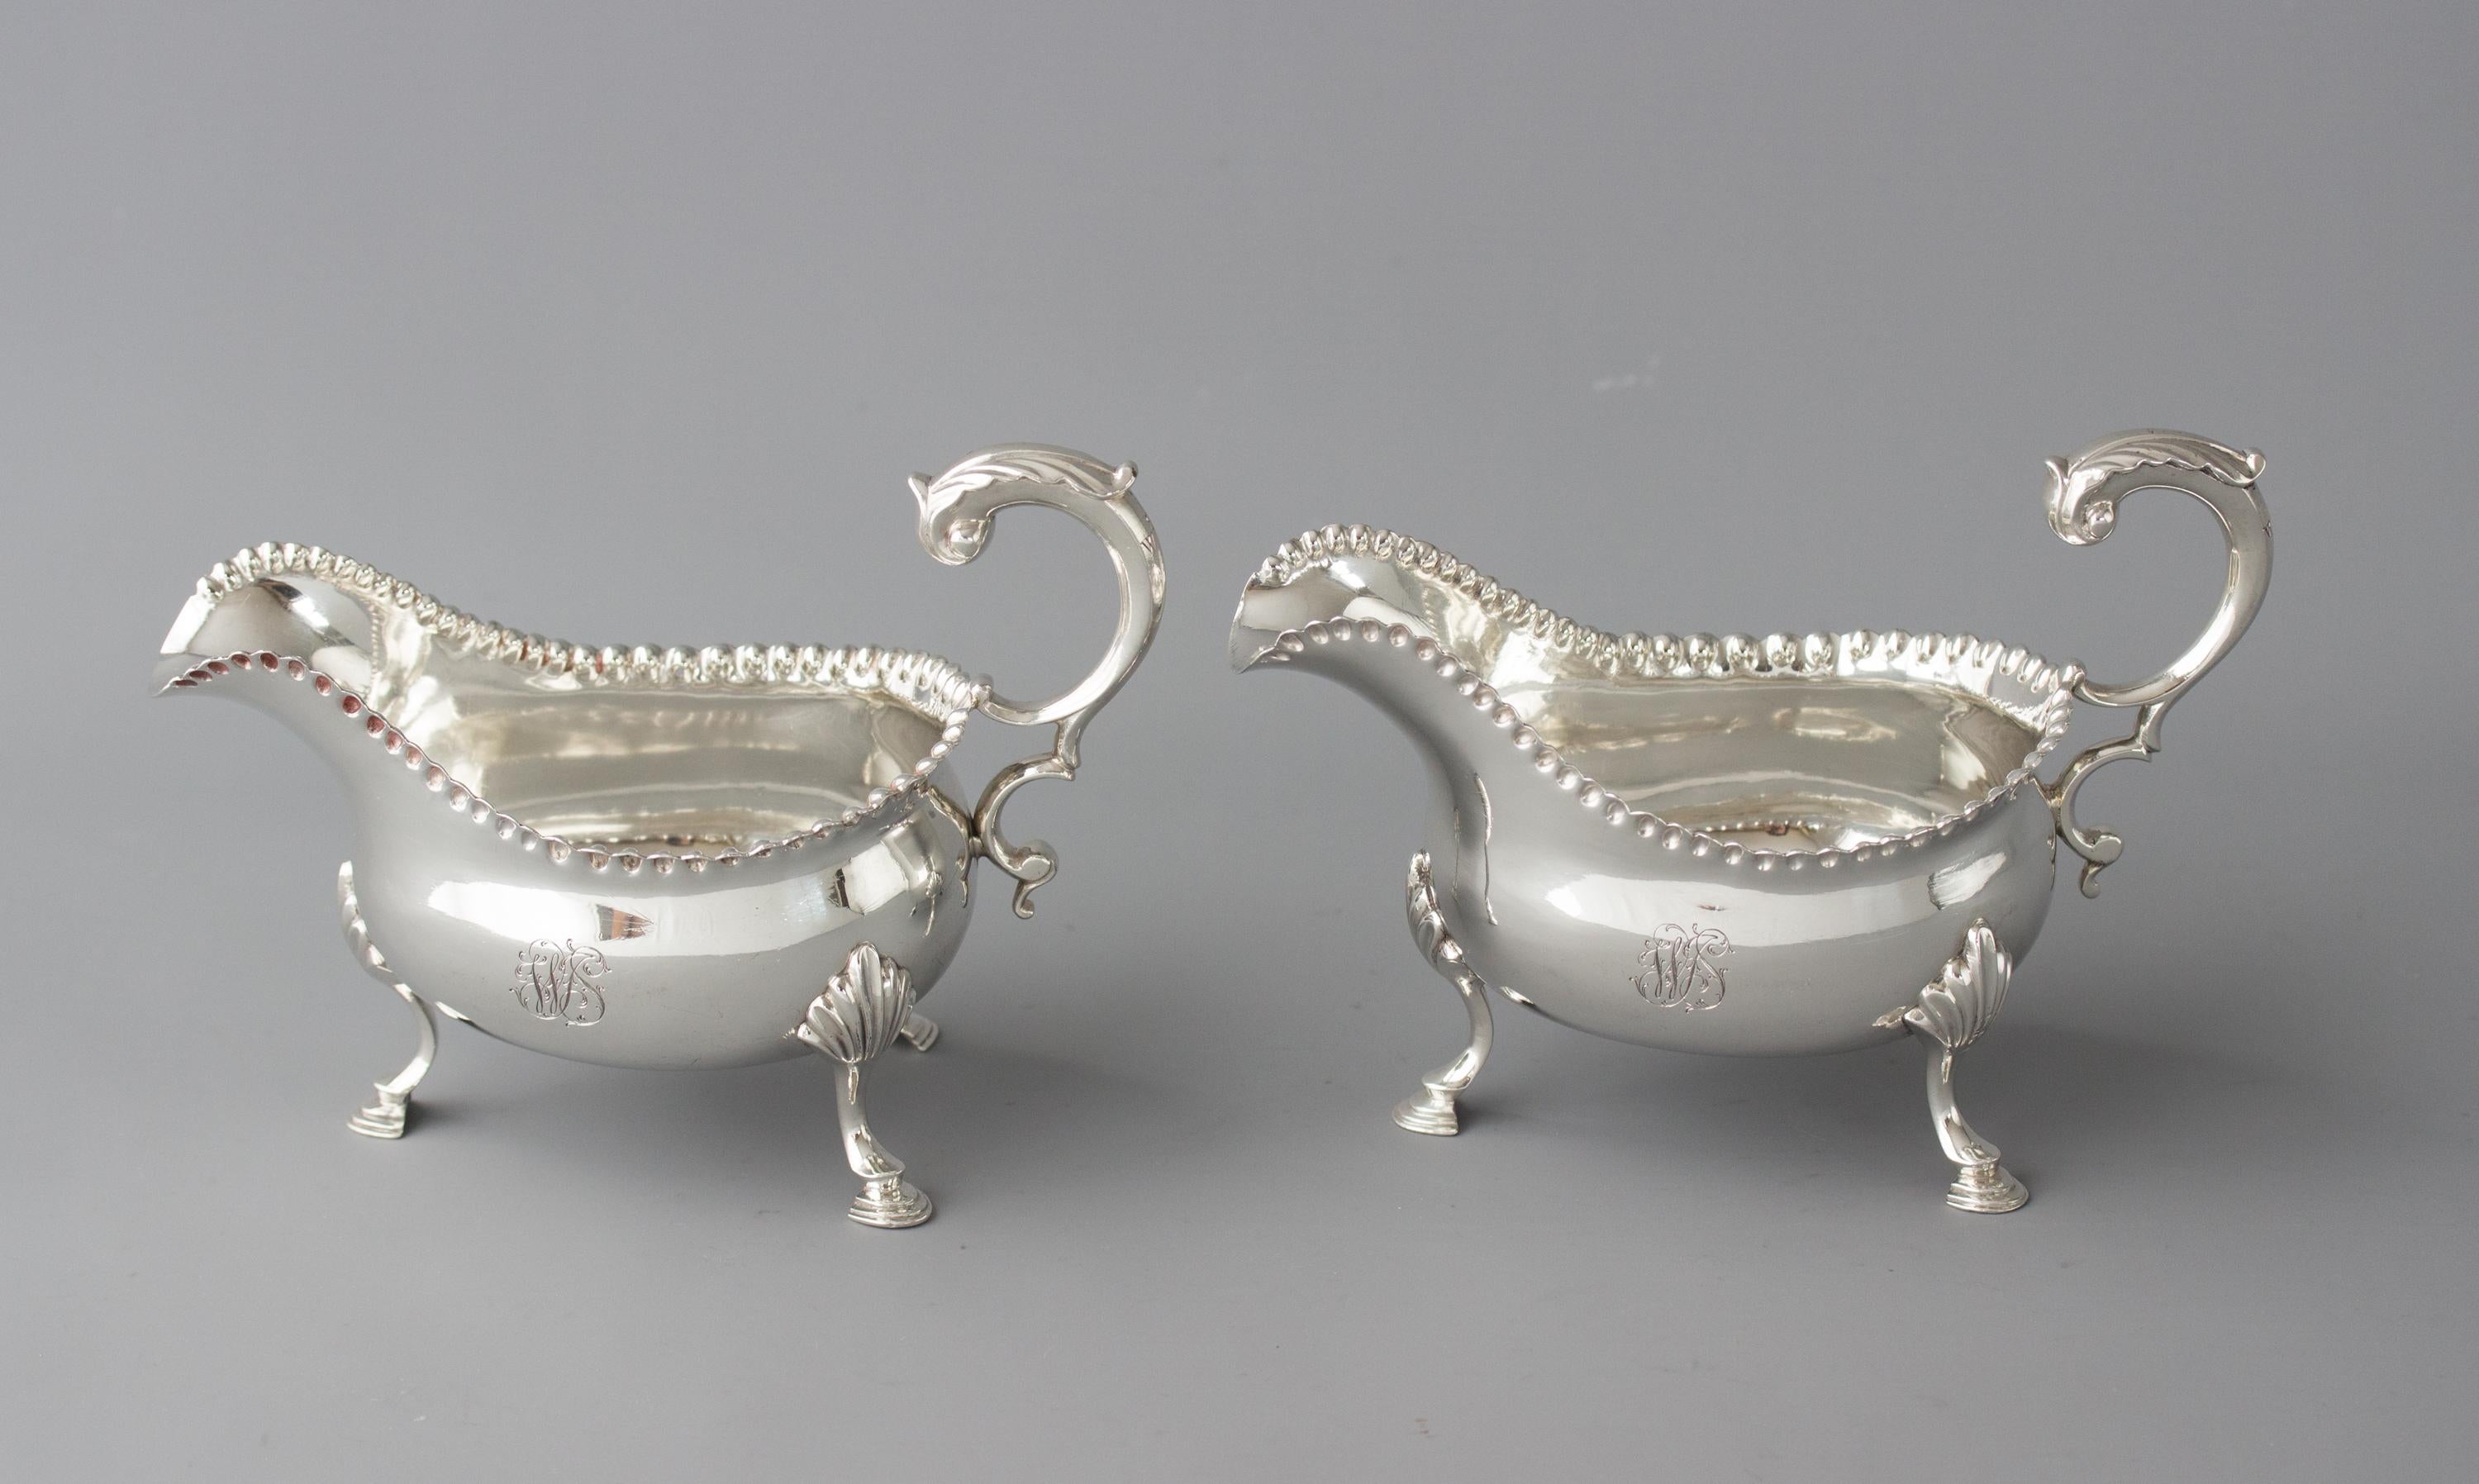 A Pair of George III Silver Sauce Boats, London 1768 by W & J Priest For Sale 6